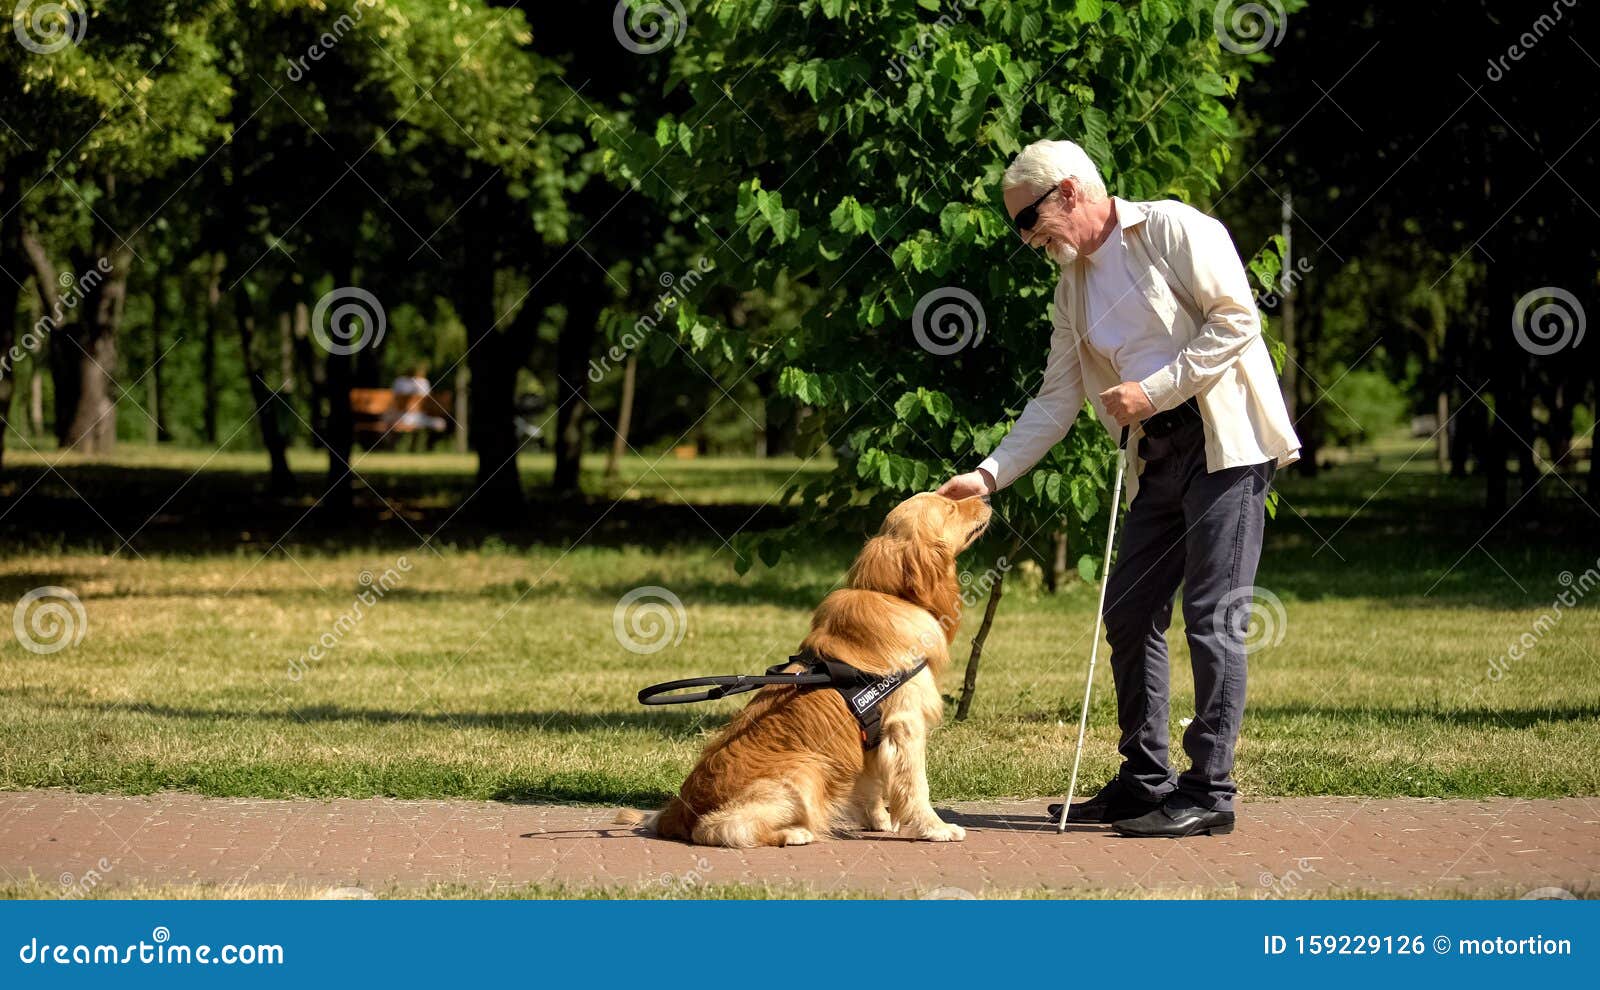 blind man training guide dog in park, giving obedience commands, impairment